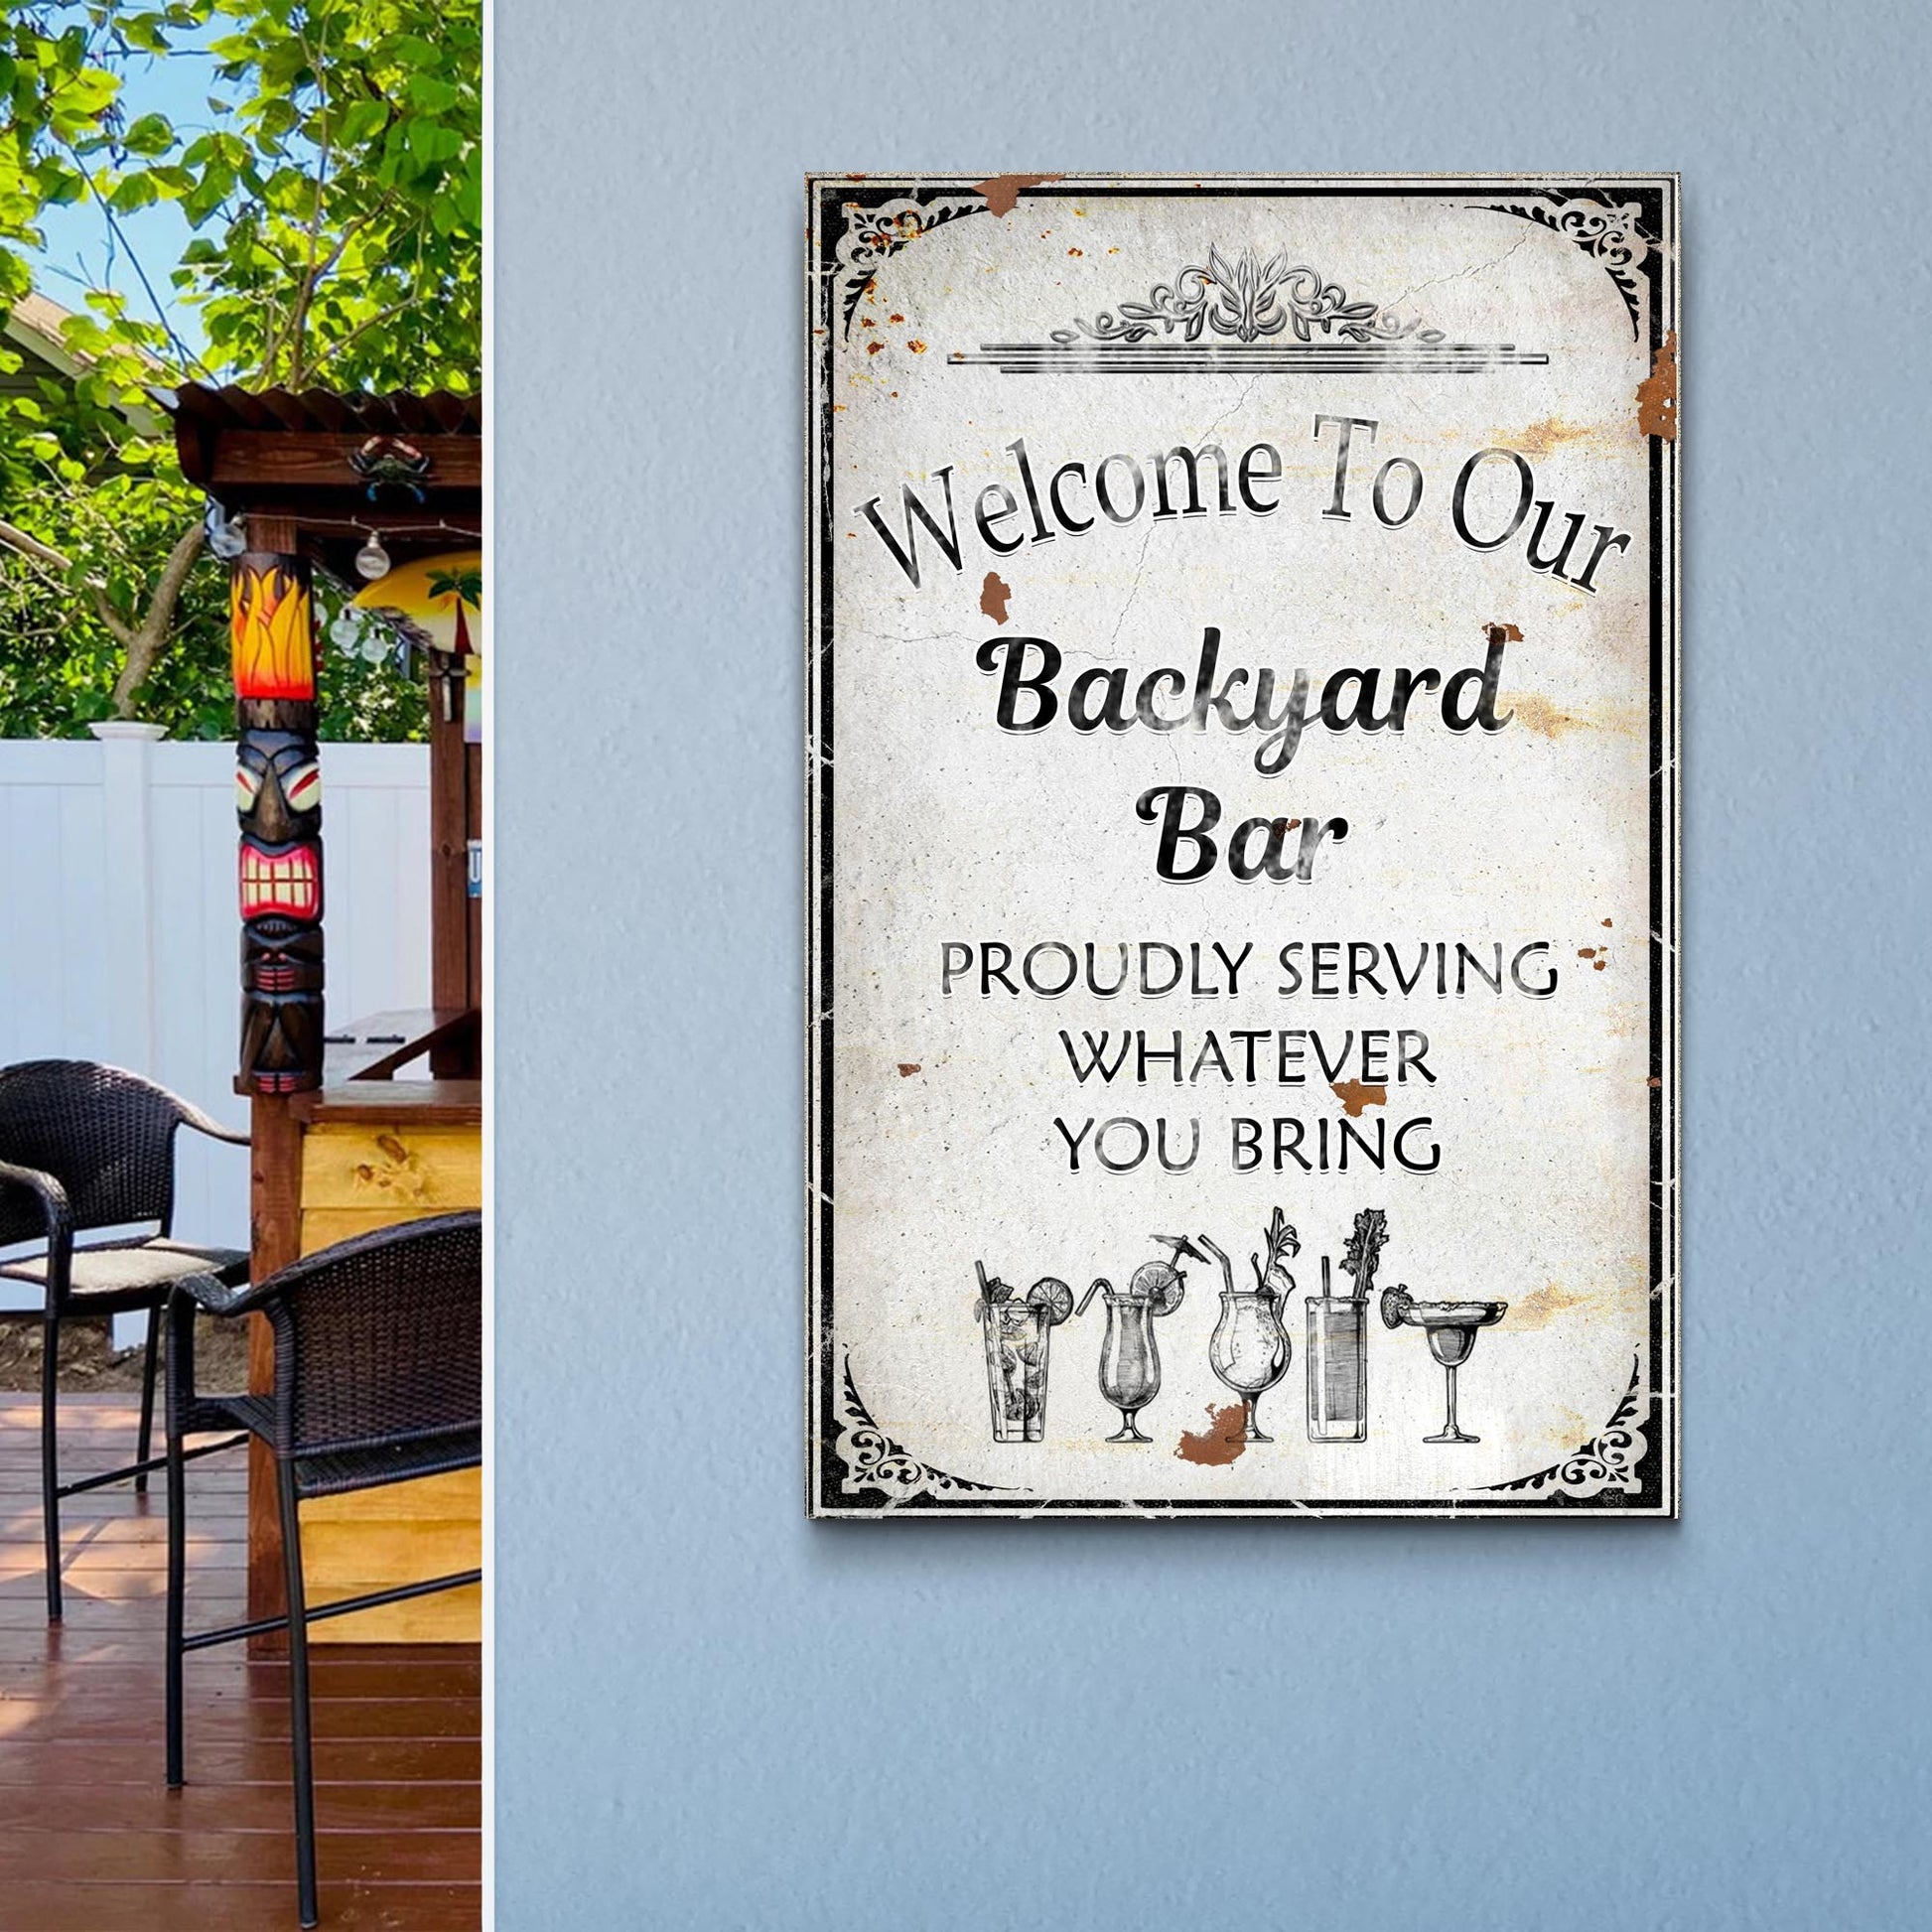 Backyard Bar Sign - Image by Tailored Canvases